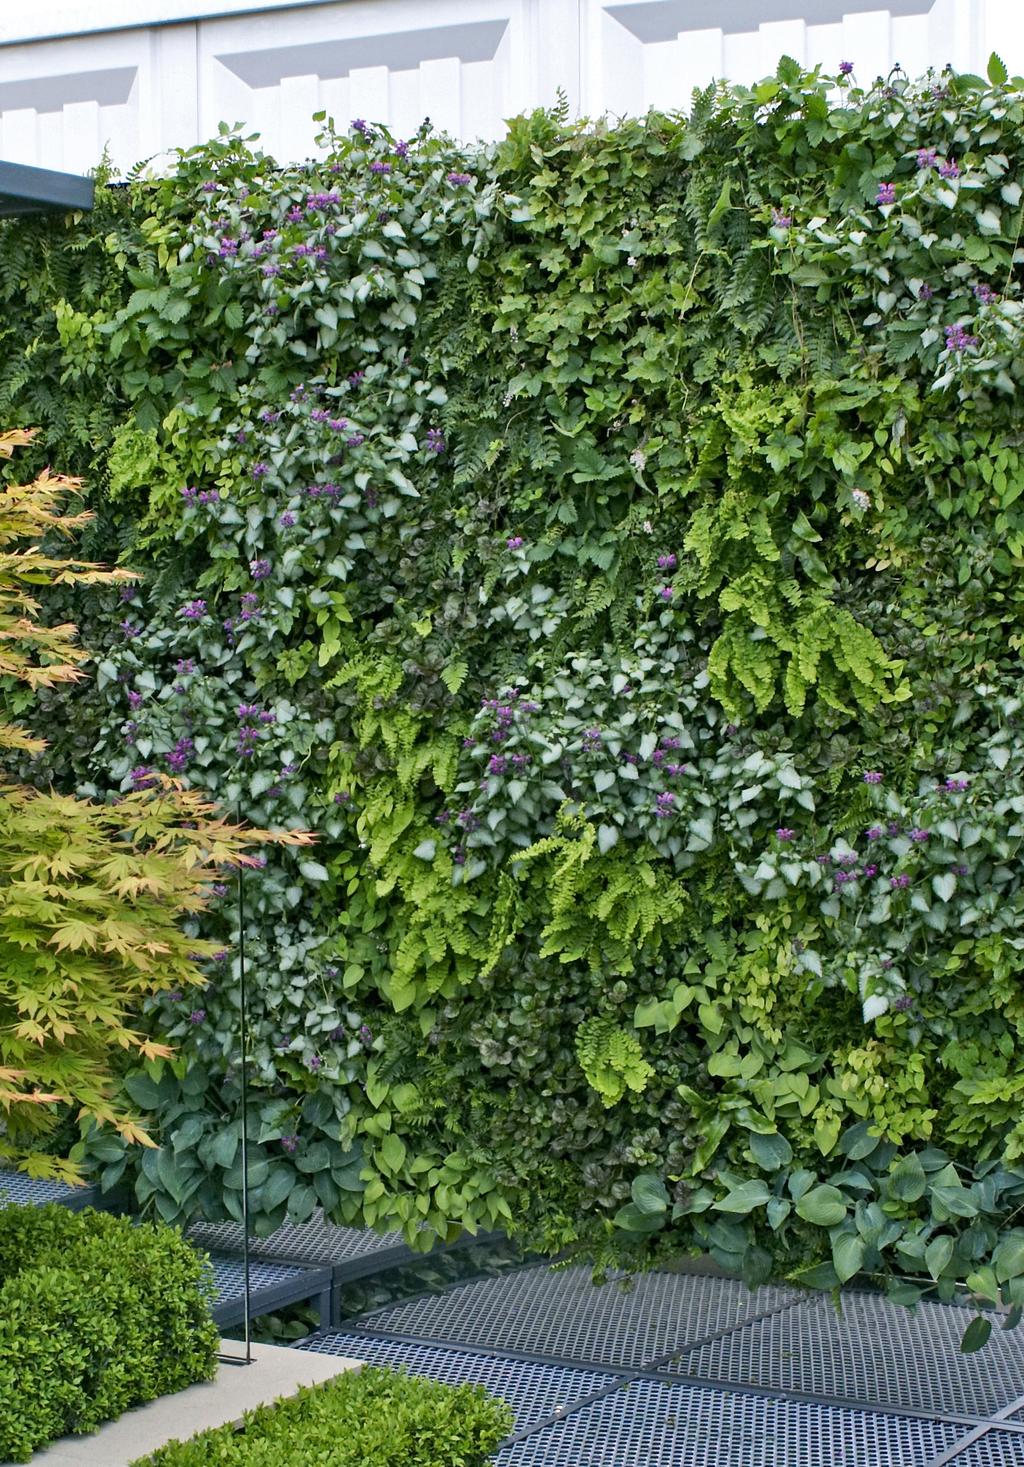 GREEN WALL SOLUTIONS FOR HOMES AND OFFICES AND PUBLIC SPACES. Our products are designed to bring attractive decorative green features to your working and living spaces.